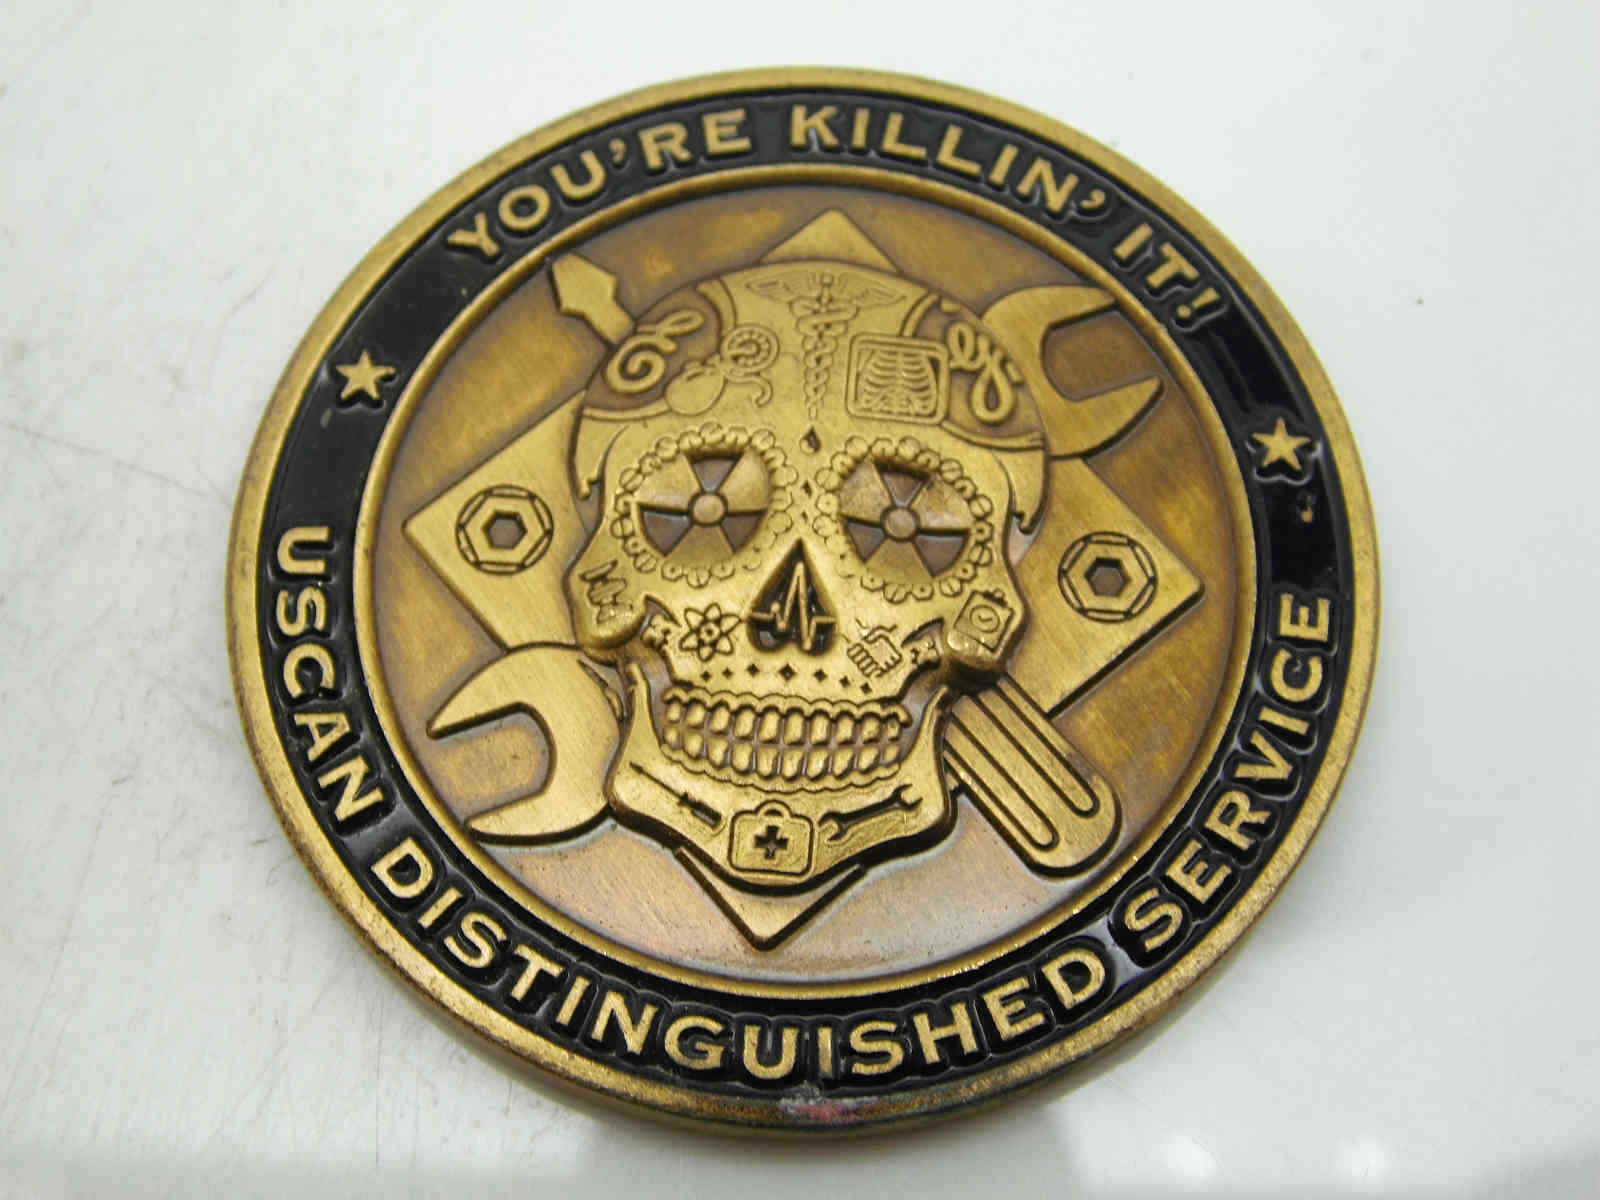 USCAN DISTINGUISHED SERVICE IMPROVING LIVES IN MOMENTS CHALLENGE COIN